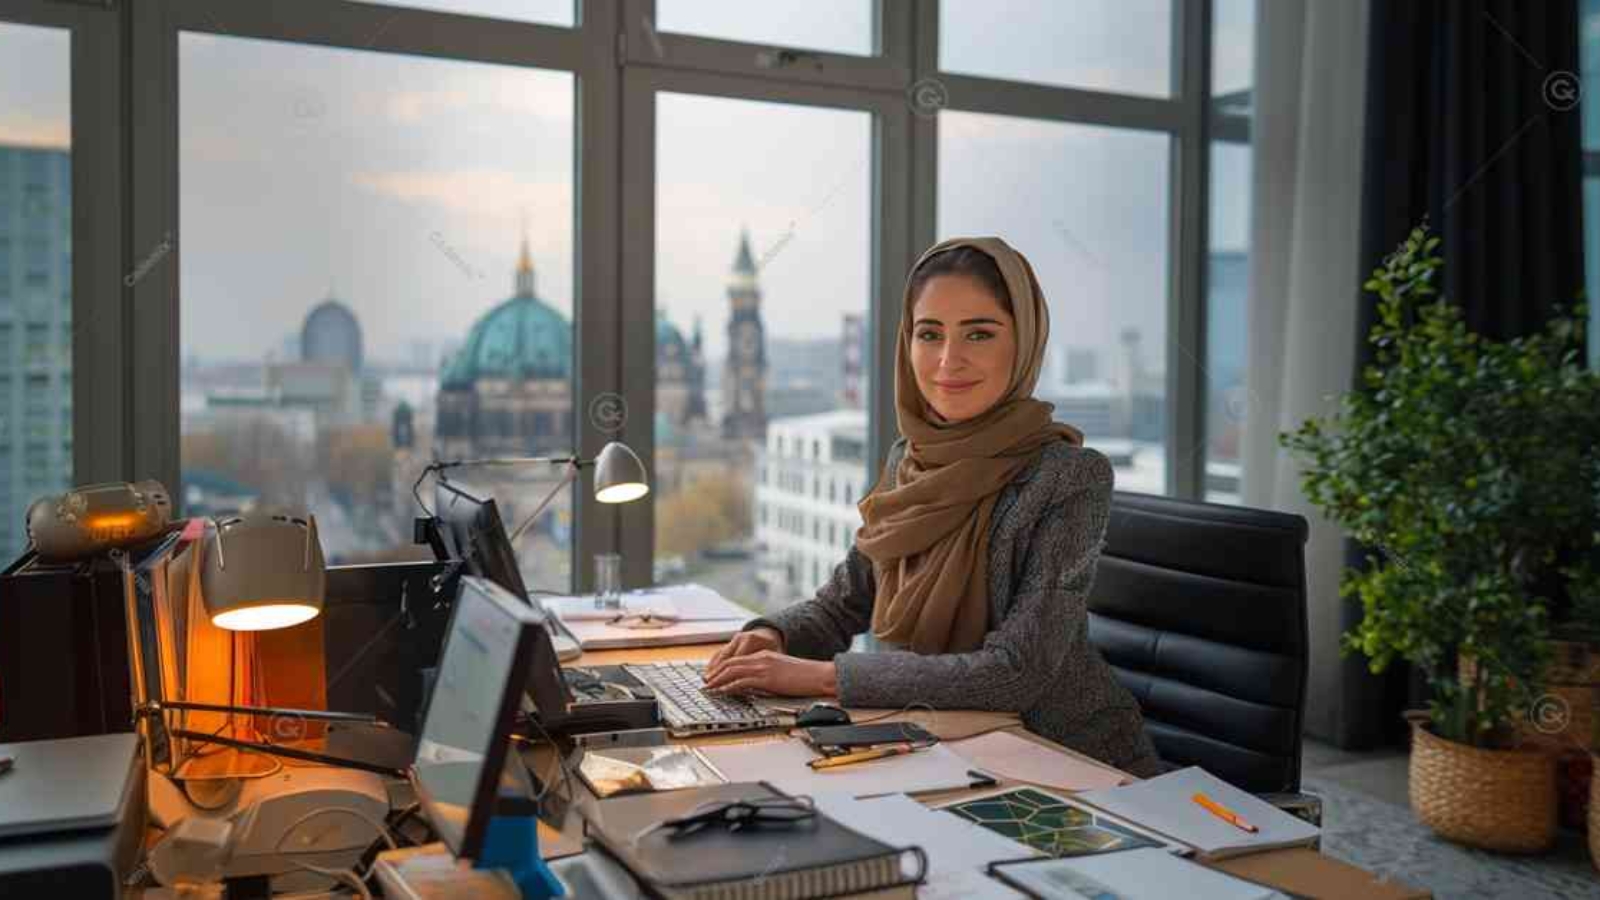 You can see the image of a woman sitting at her desk on the top floor of an apartment and looking at the camera and And maybe she checks her job offers. Germany's Biggest Cities